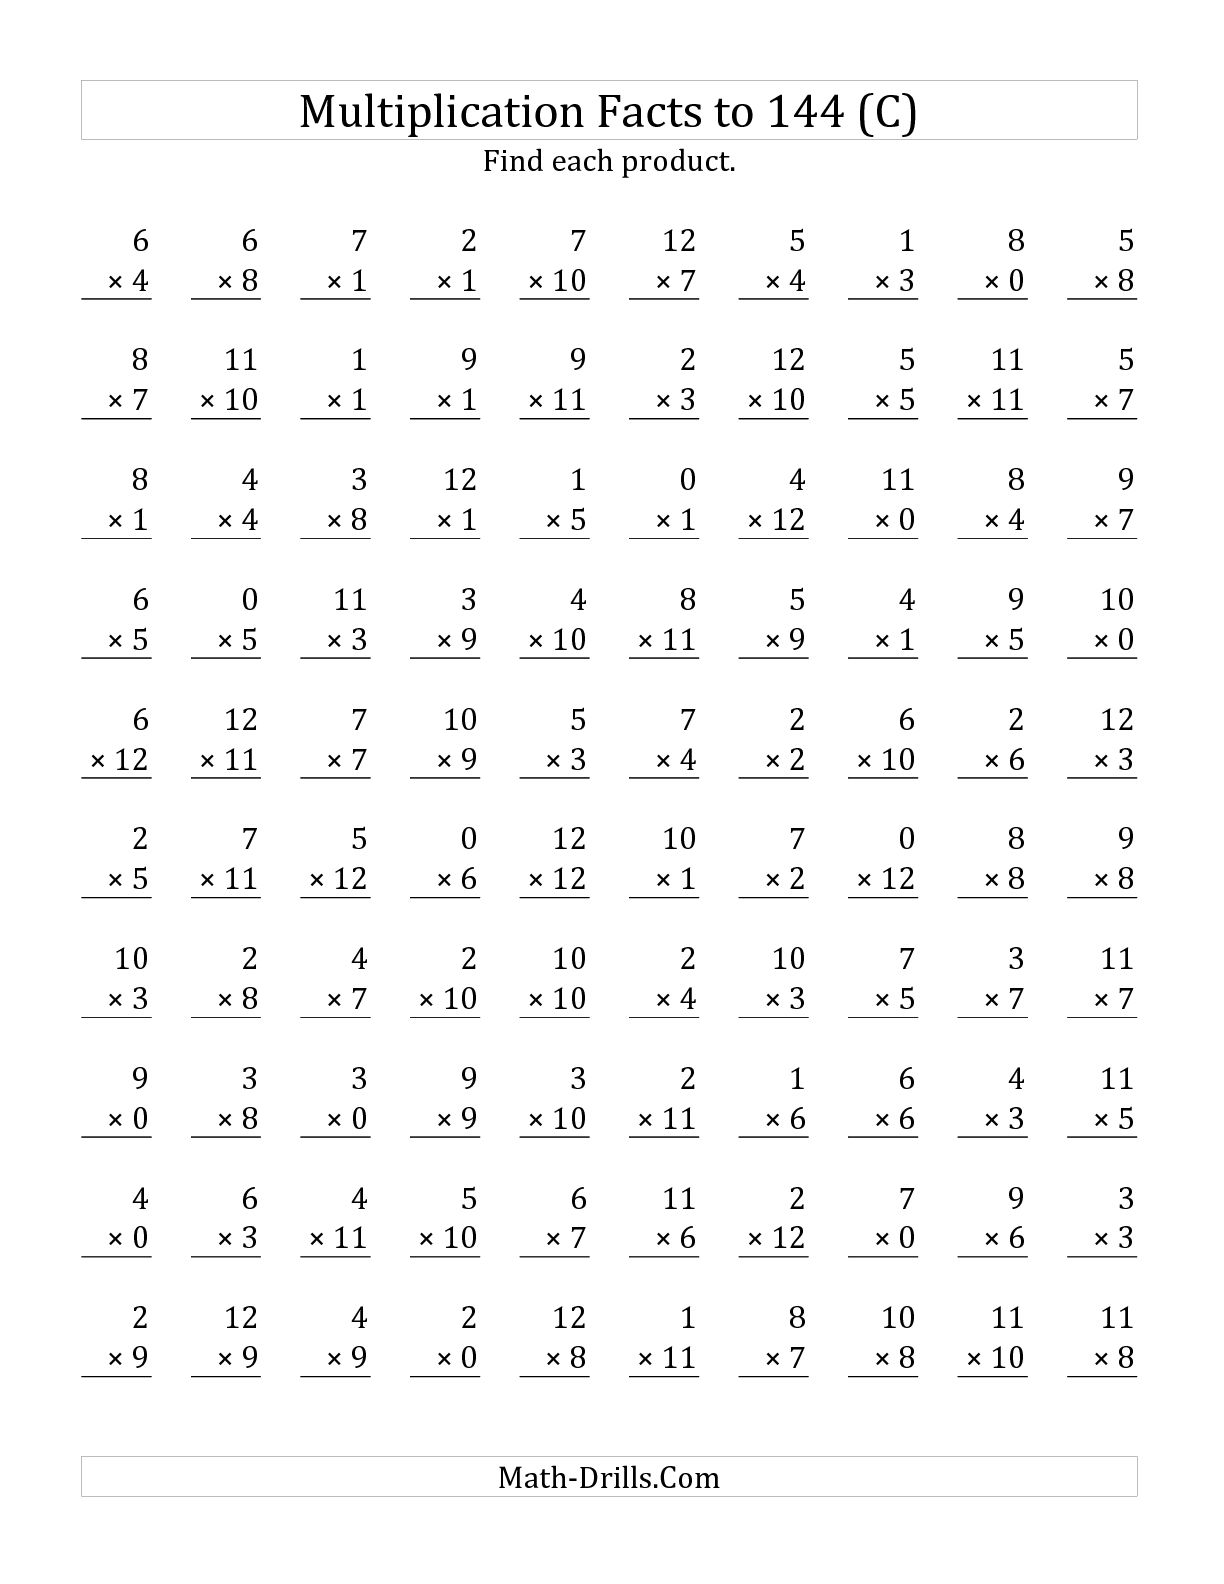 15-best-images-of-mad-minute-multiplication-drill-worksheets-mad-minute-math-addition